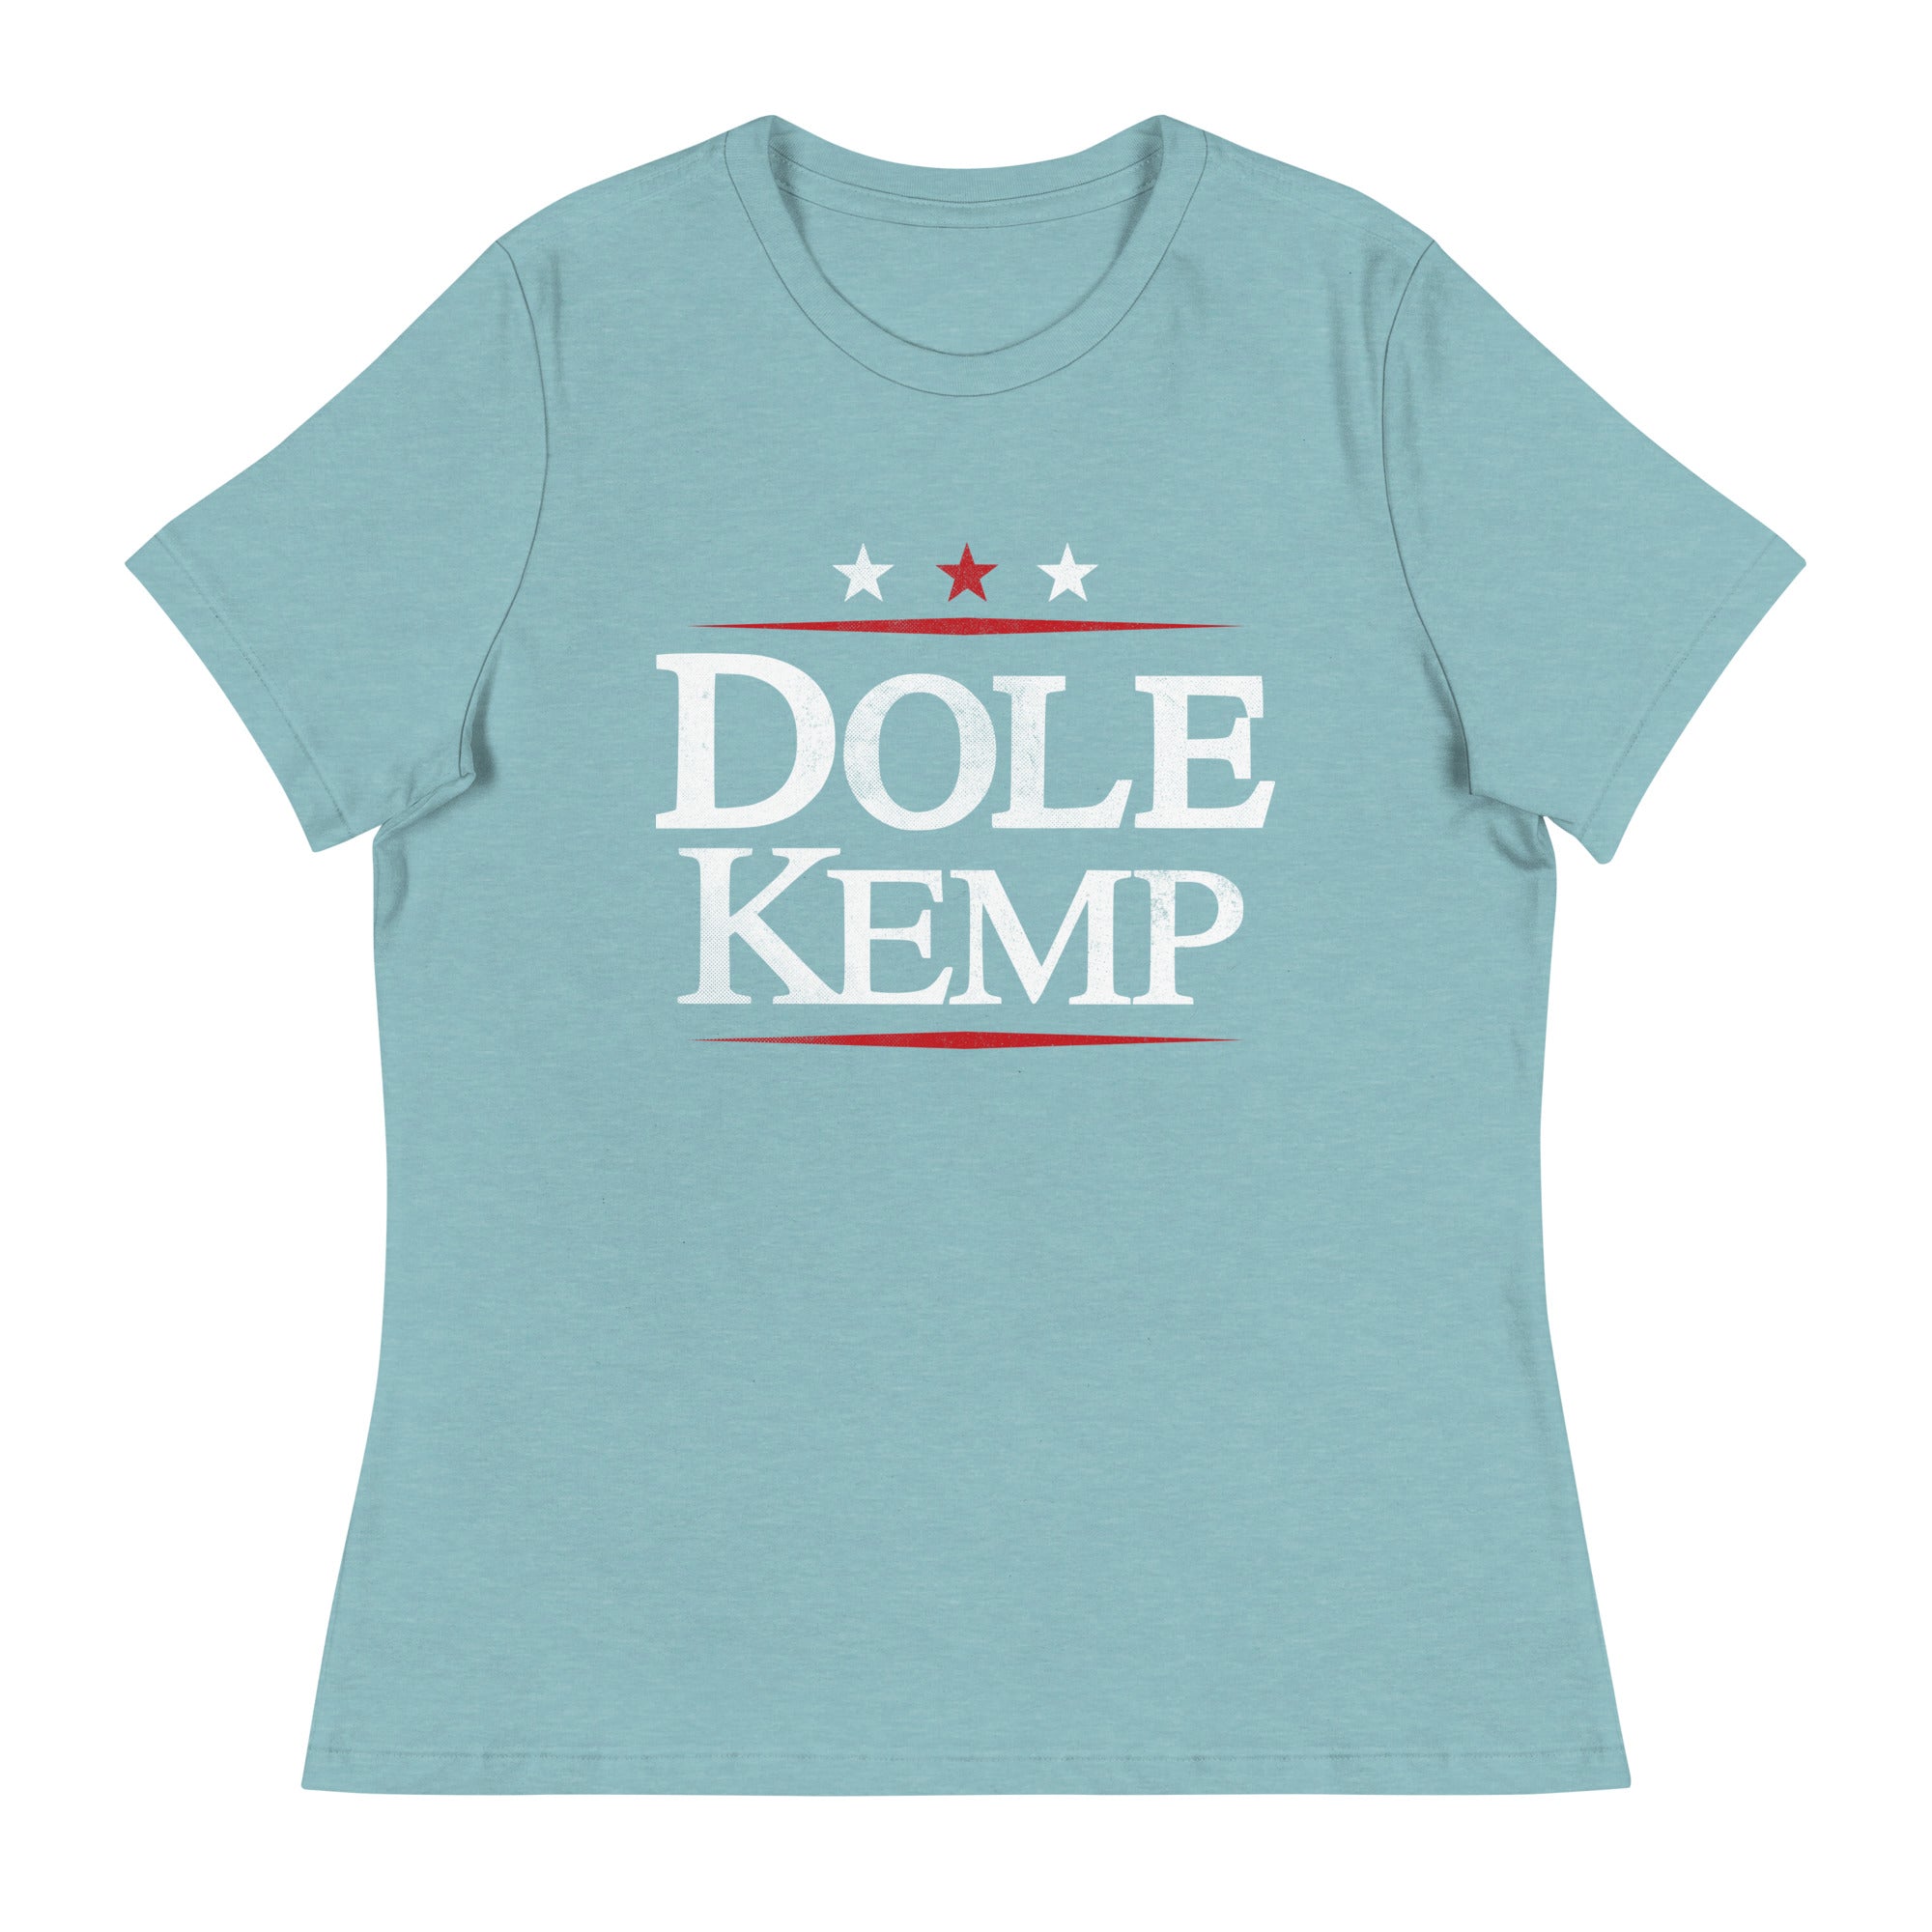 Dole Kemp 1996 Campaign Women's Relaxed T-Shirt